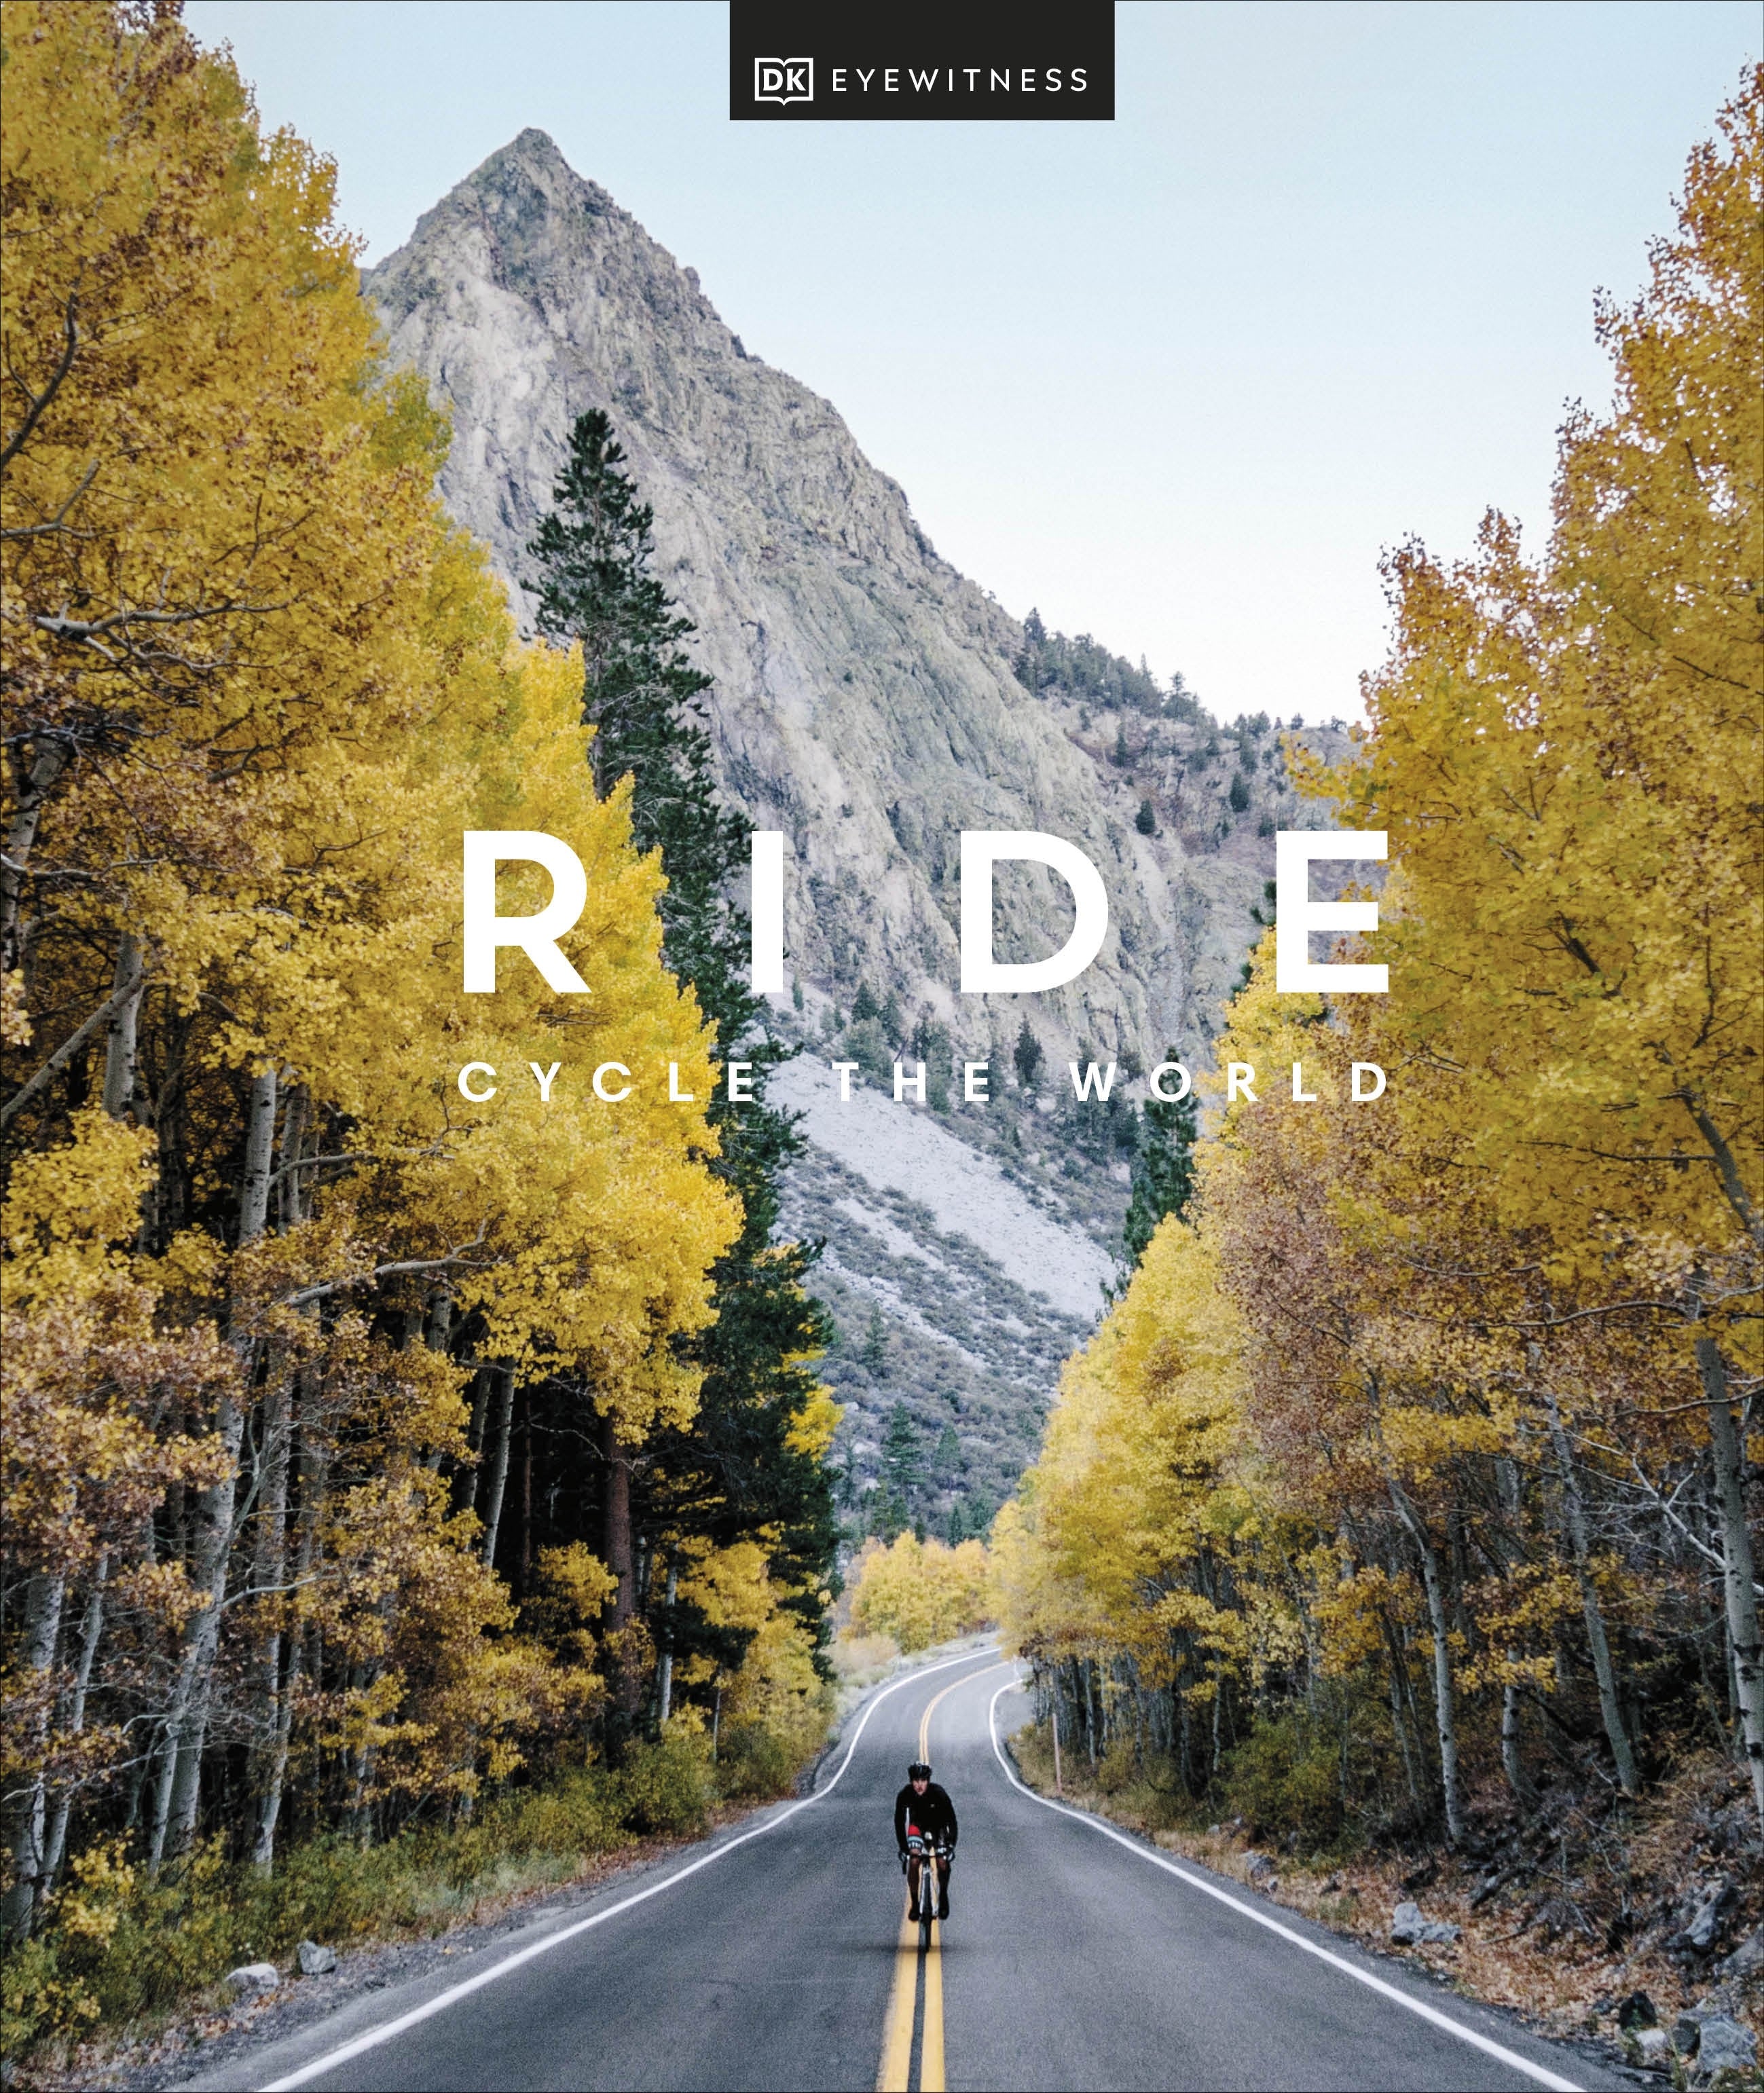 RIDE: CYCLE THE WORLD